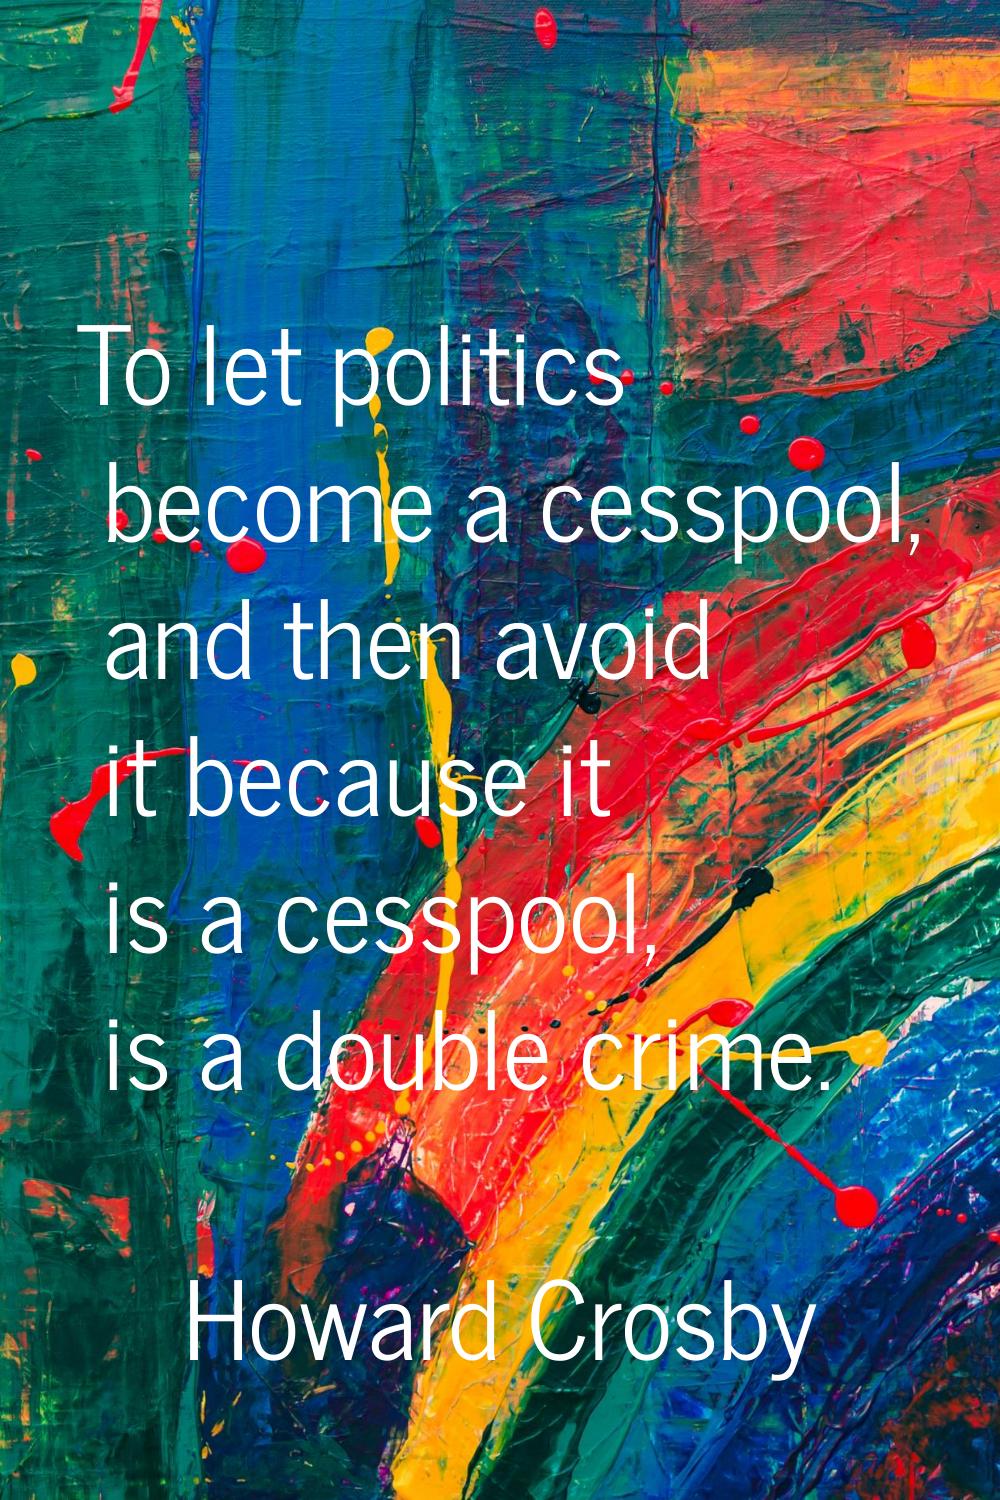 To let politics become a cesspool, and then avoid it because it is a cesspool, is a double crime.